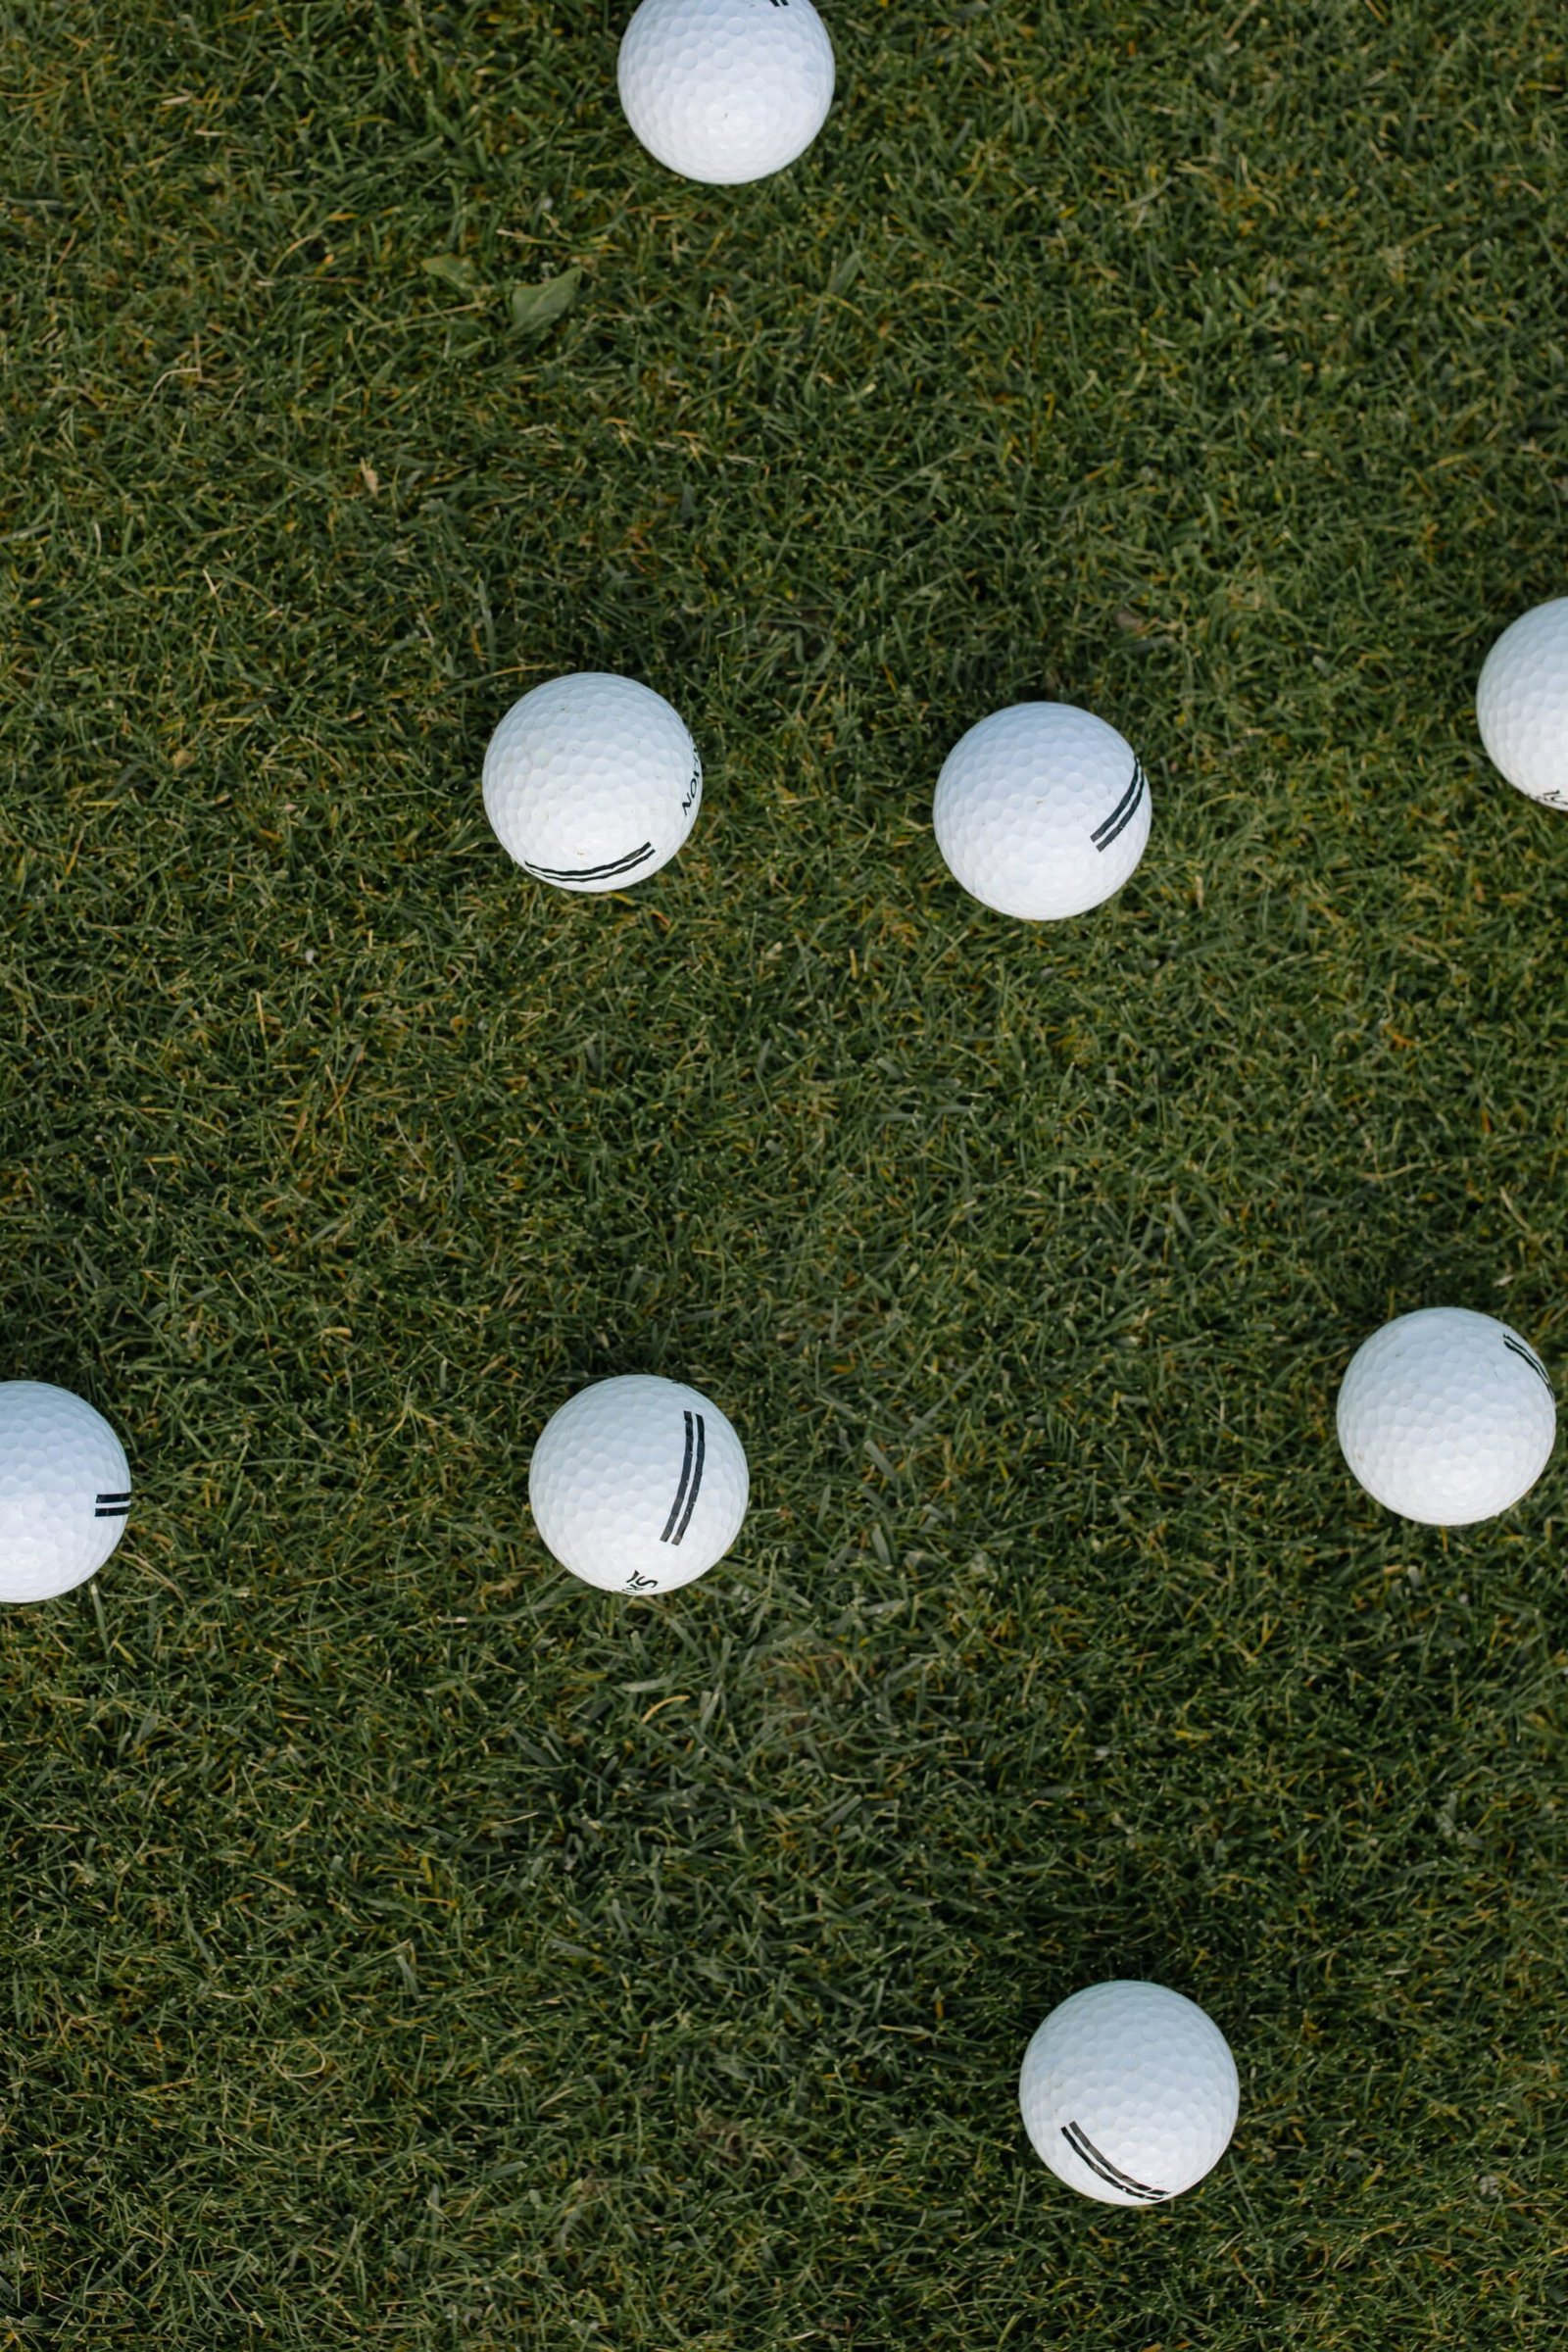 Understanding the Expense: How Much Does Top Golf Cost?